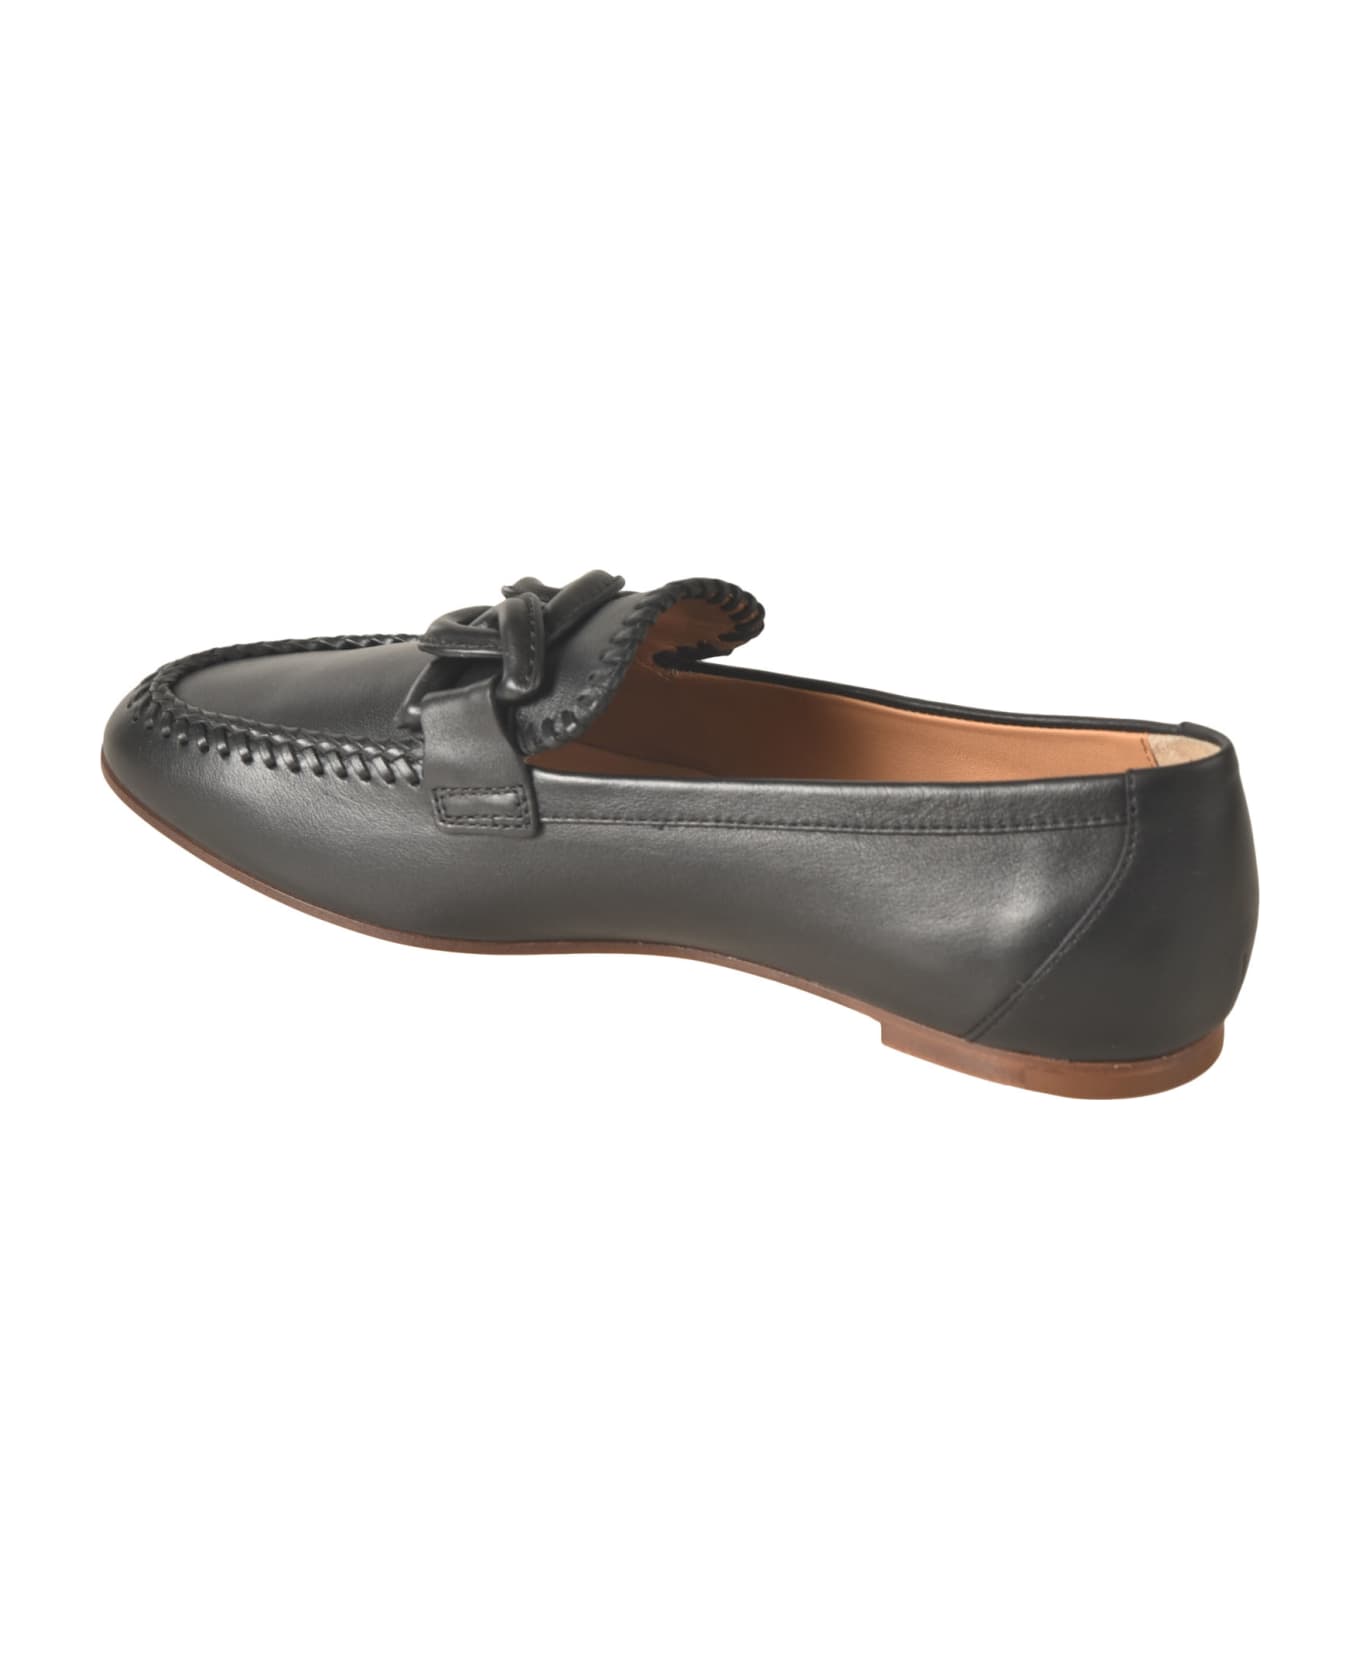 Tod's 79a Infilatura Loafers - Black